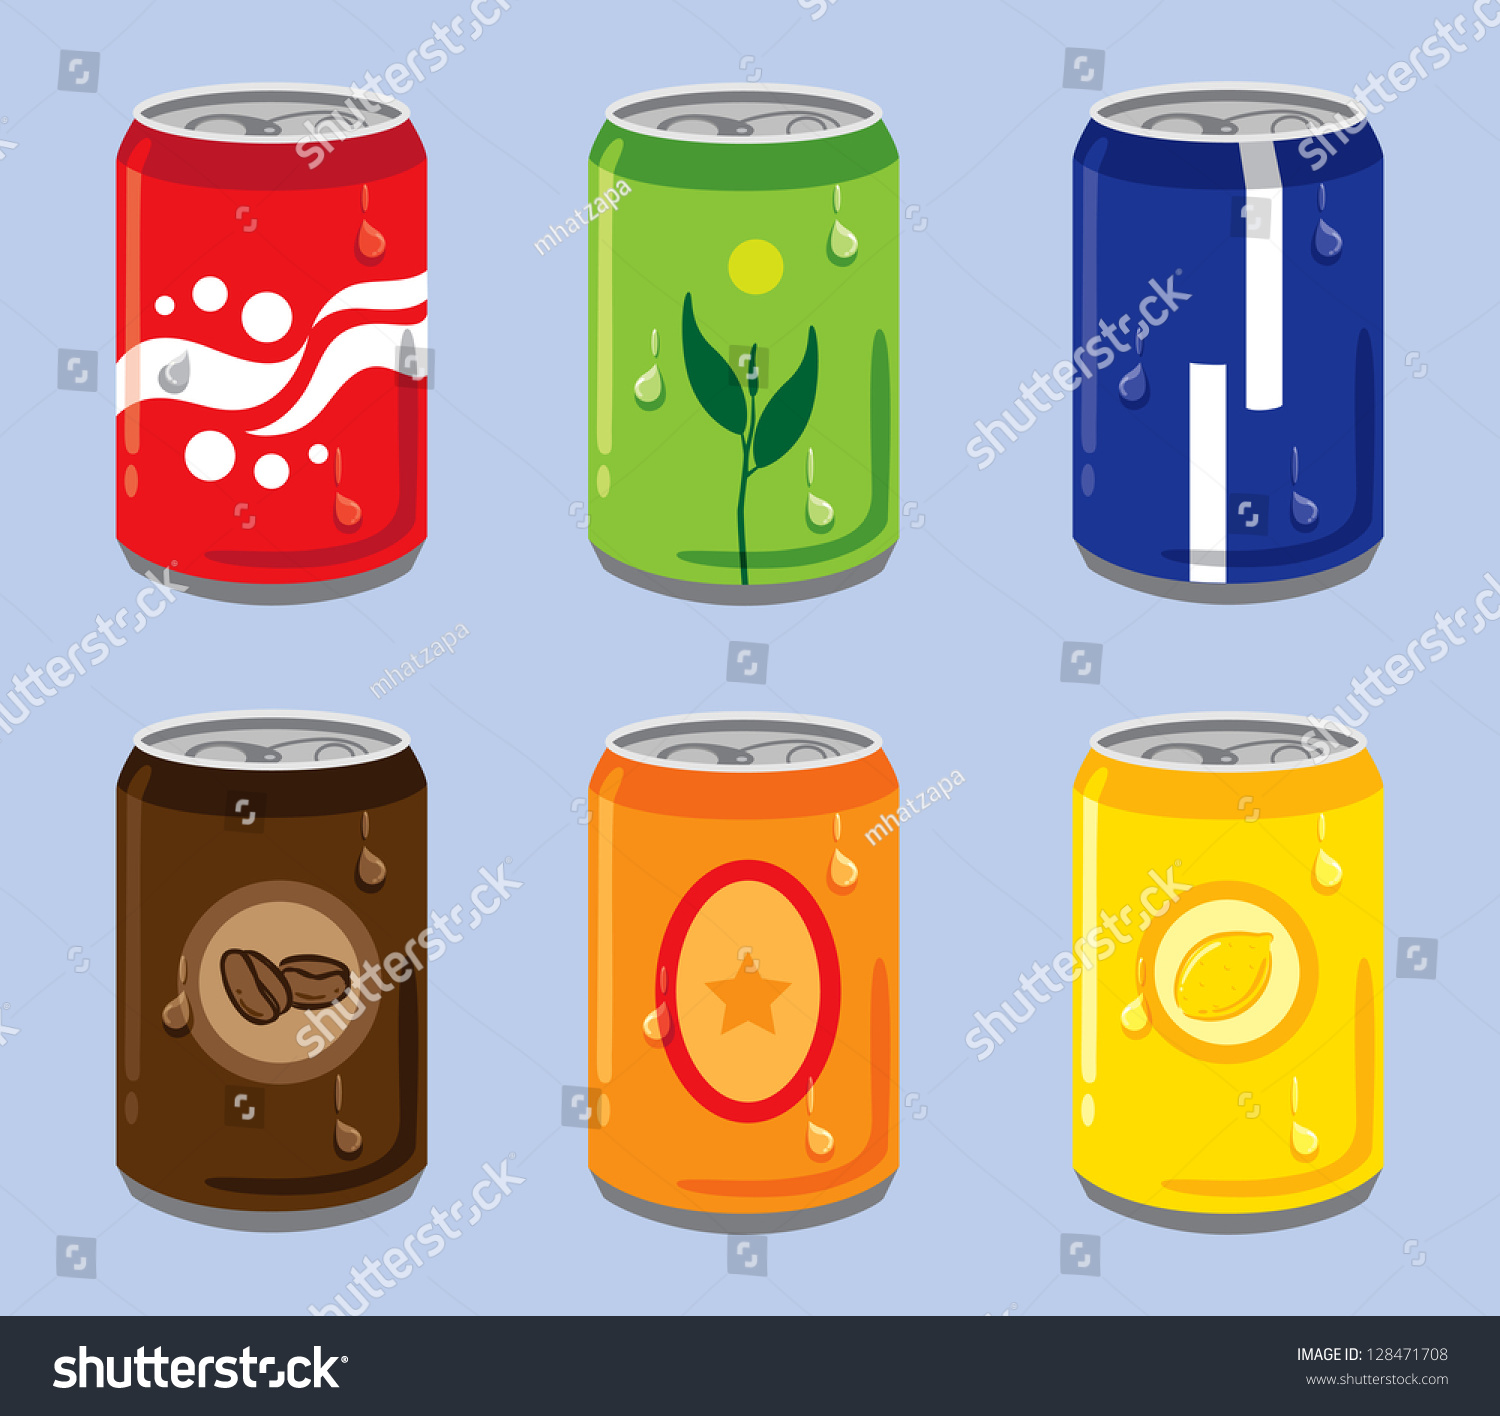 Soft Drink Cans Stock Vector 128471708 : Shutterstock